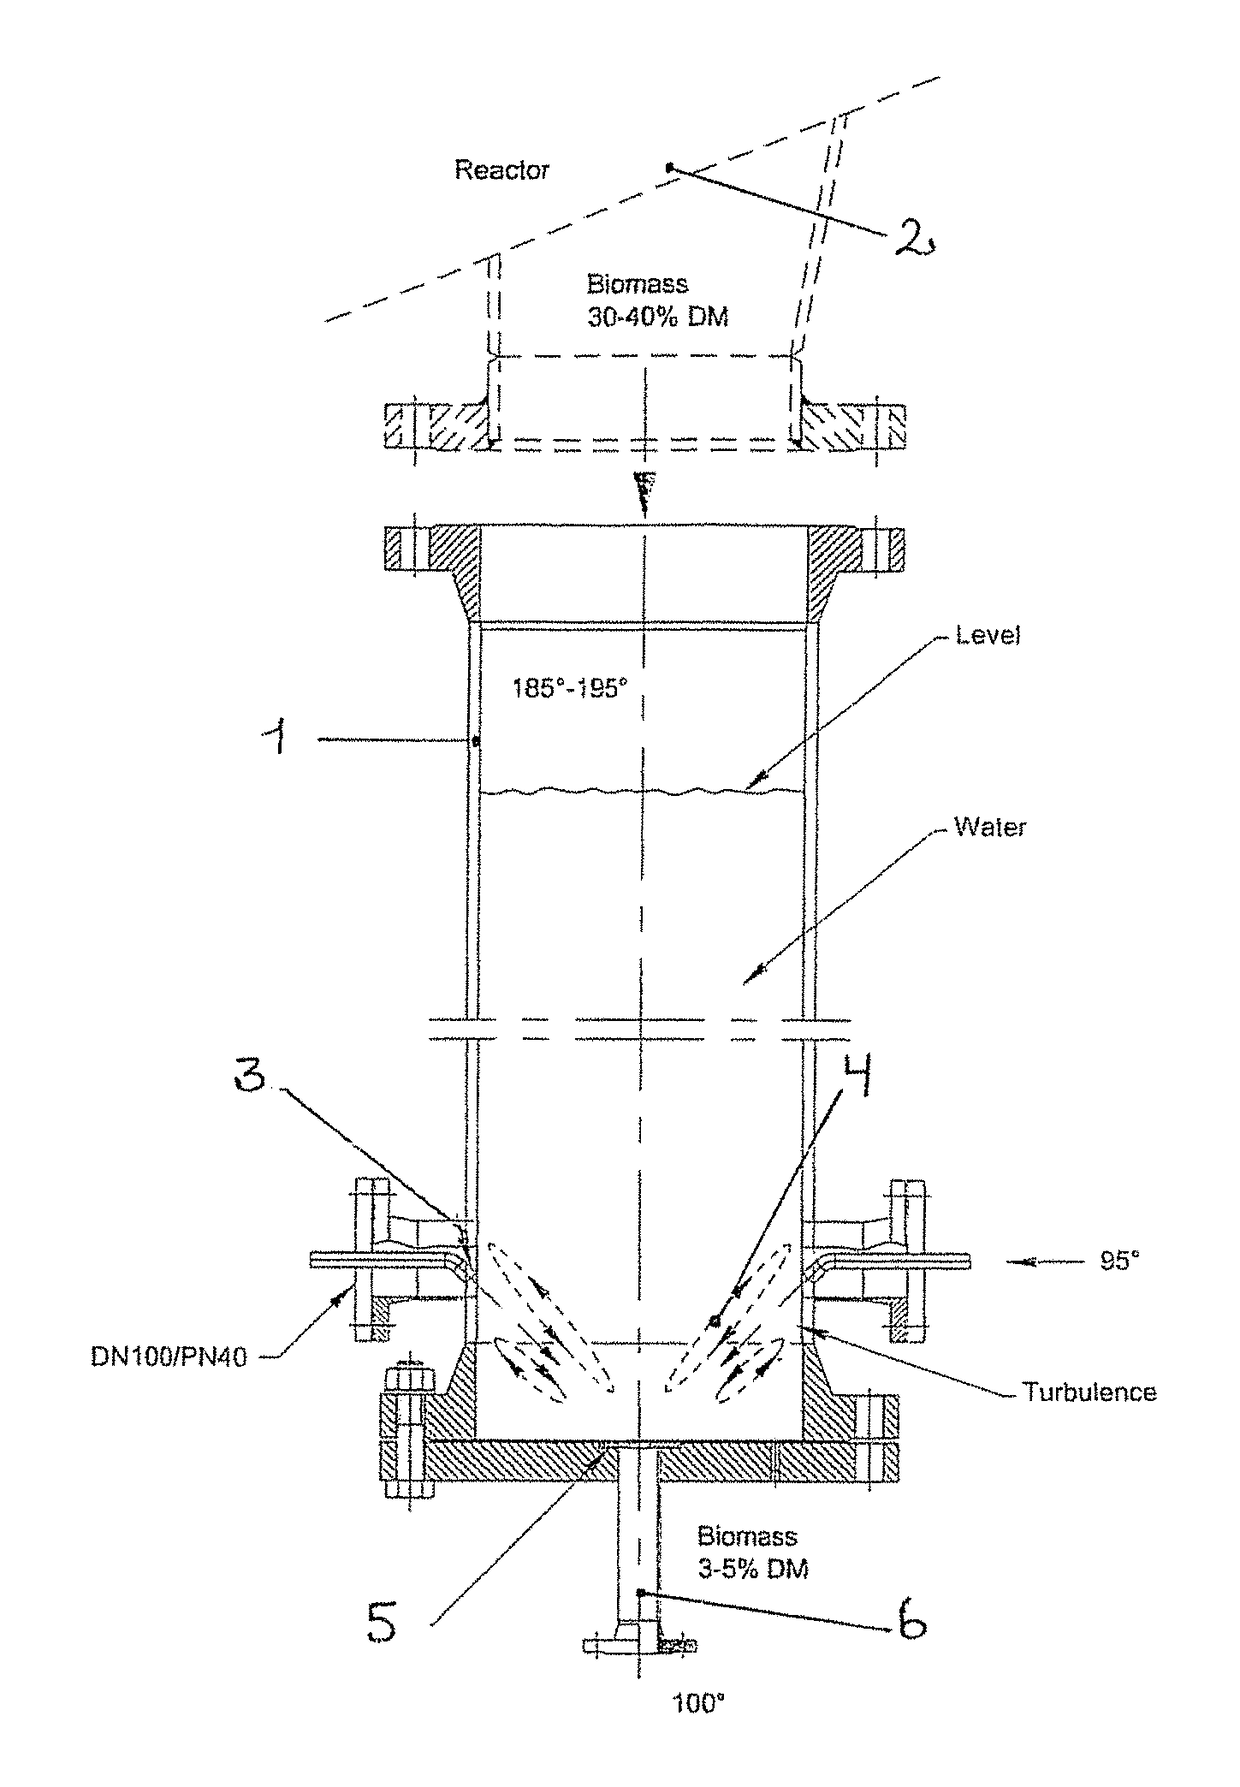 Device for discharging pretreated biomass from higher to lower pressure regions